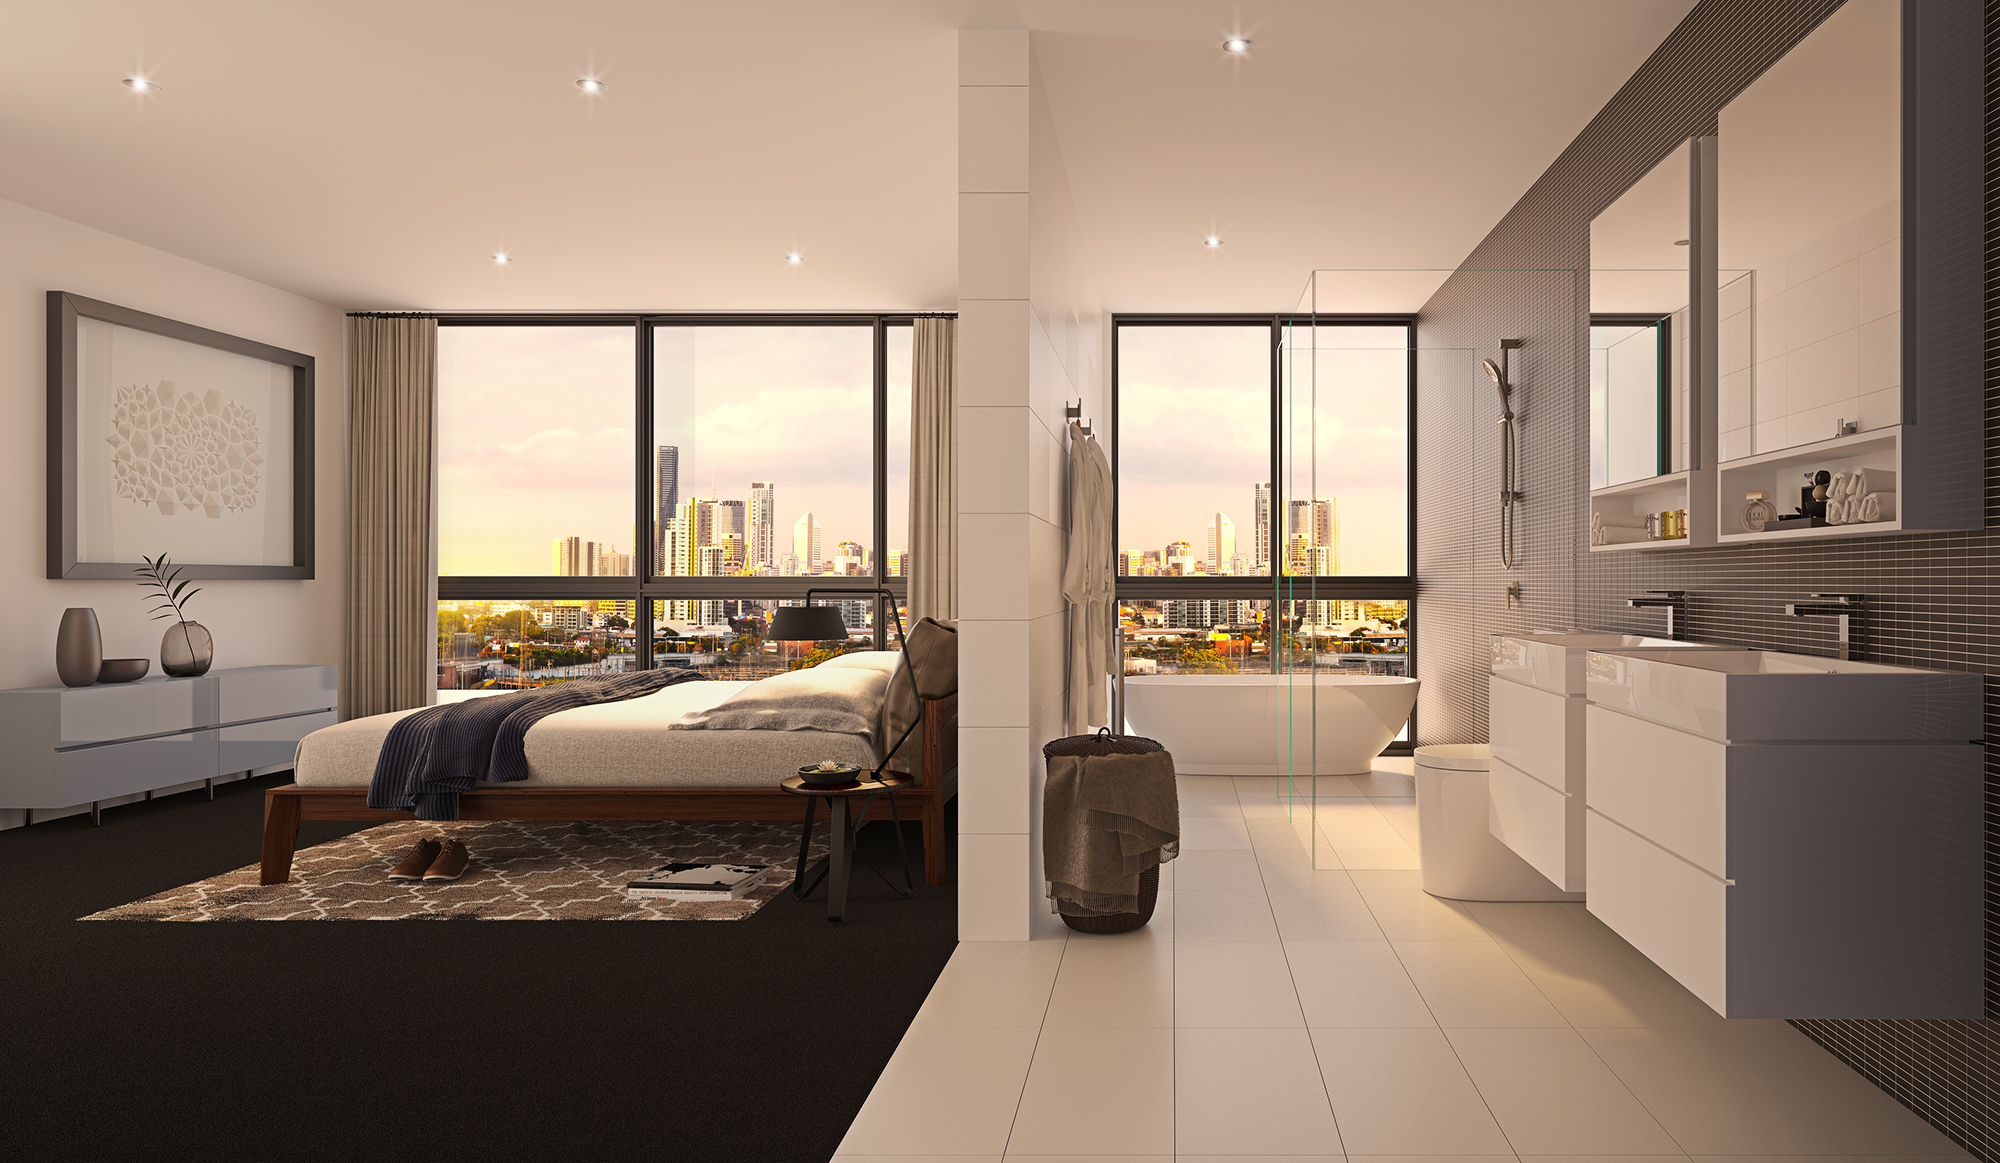 Master bedroom and ensuite in an apartment with a stunning view of the Brisbane city skyline. The ensuite bathroom features a freestanding bathtub positioned next to the floor-to-ceiling glazing, and a stylish black and white color scheme.